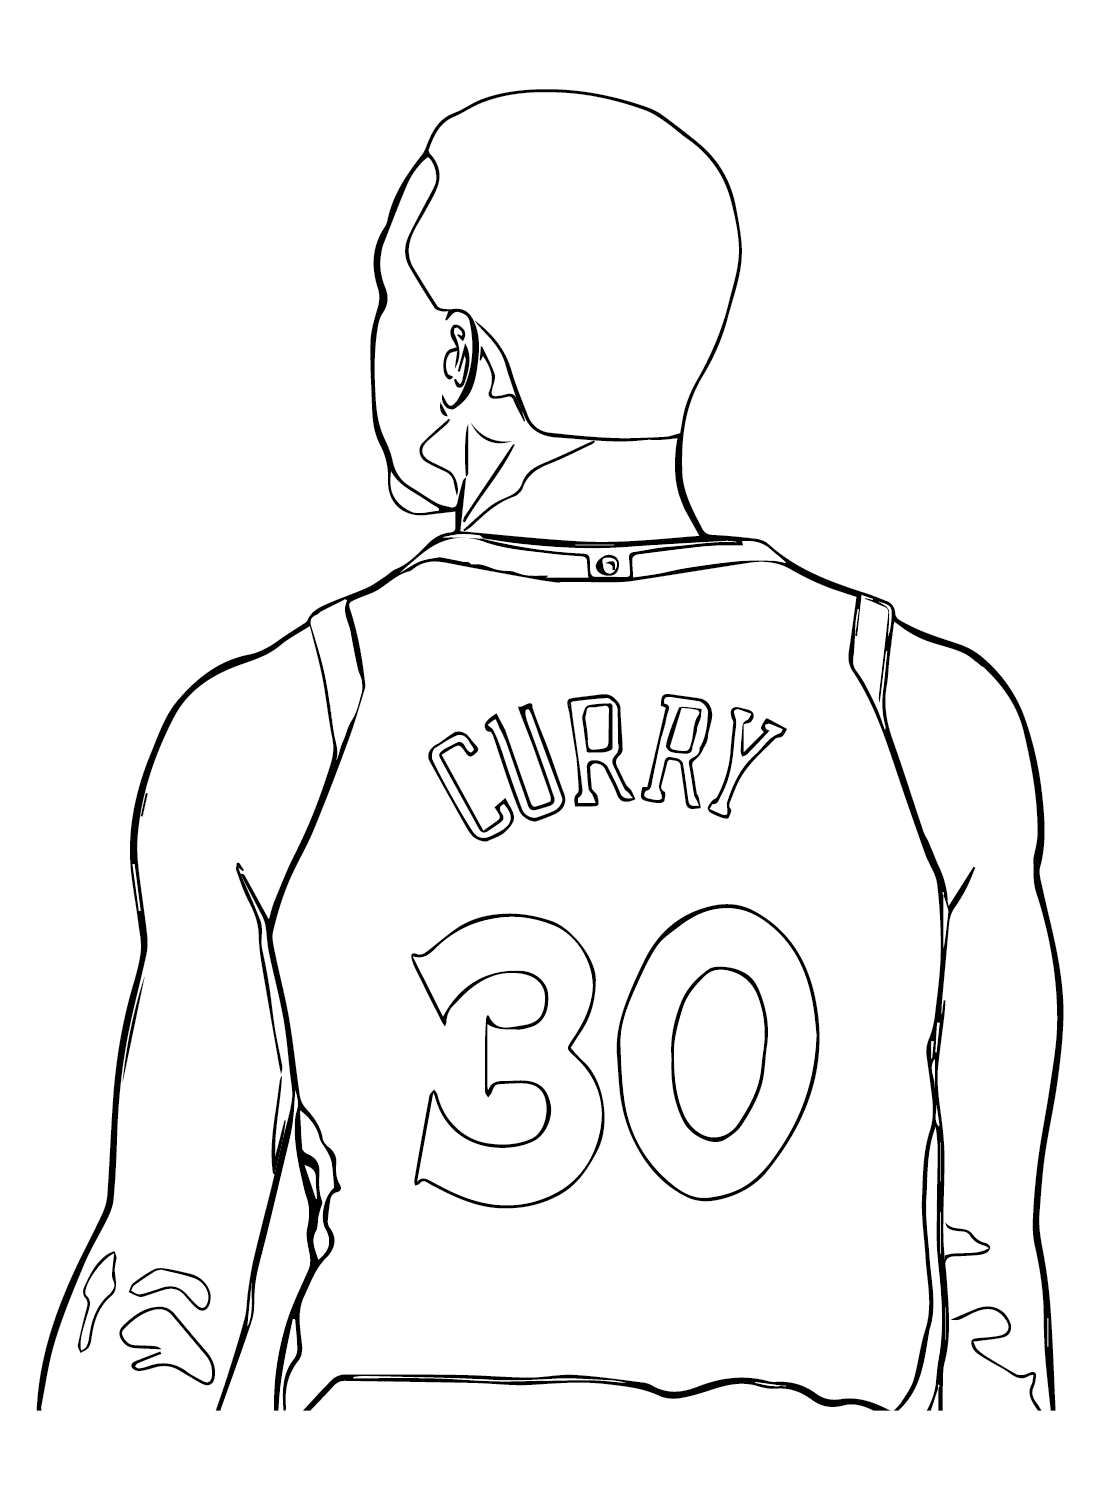 Stephen Curry Drawing Coloring Page Free Printable Coloring Pages